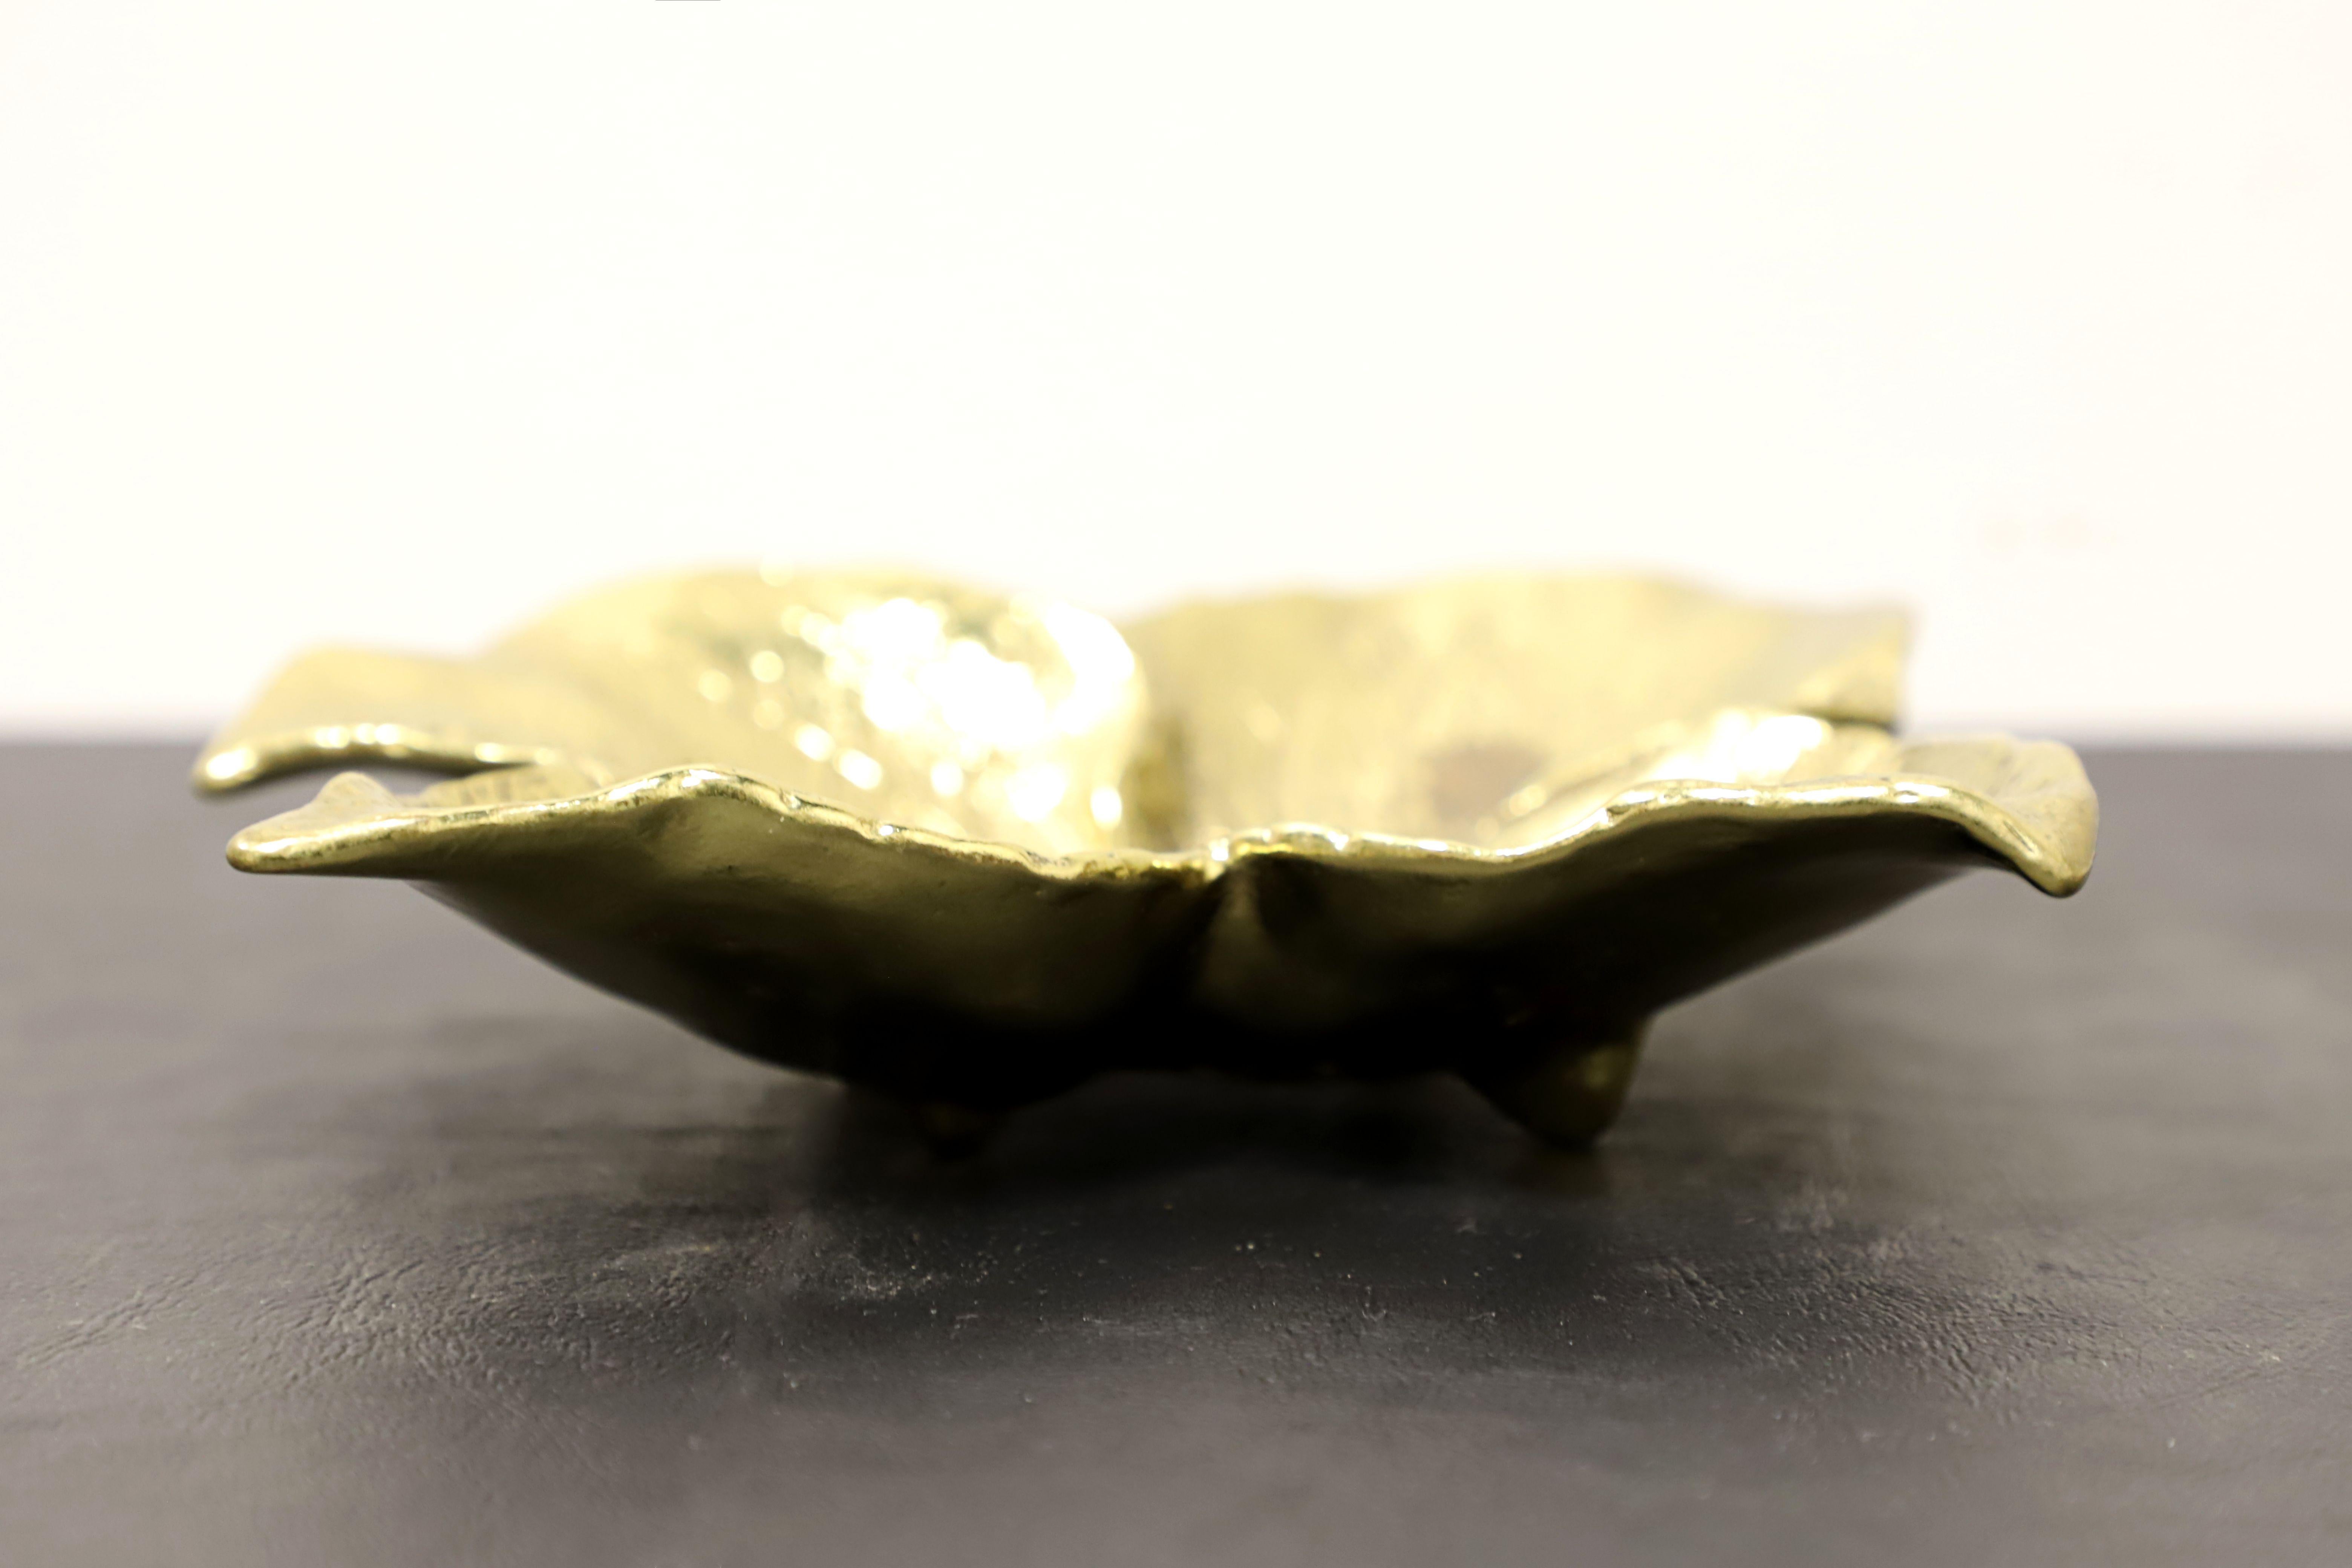 VIRGINIA METALCRAFTERS Brass Oskar J.W. Hansen Coleus Calavo Leaf Bowl 4-33 In Good Condition For Sale In Charlotte, NC